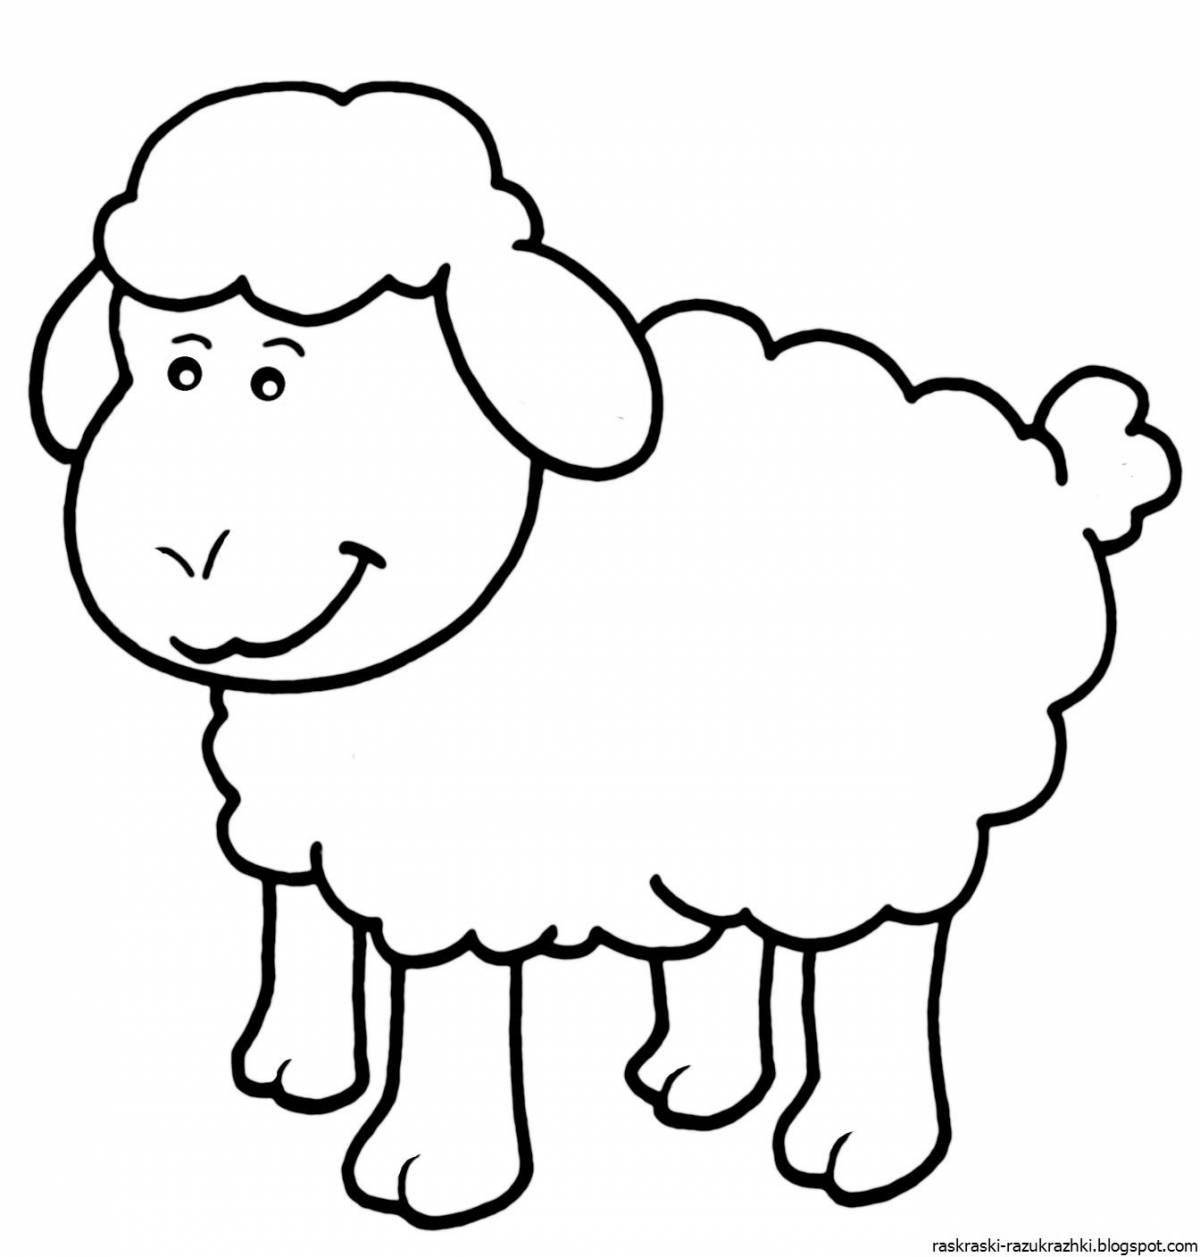 Colourful lamb coloring book for children 2-3 years old